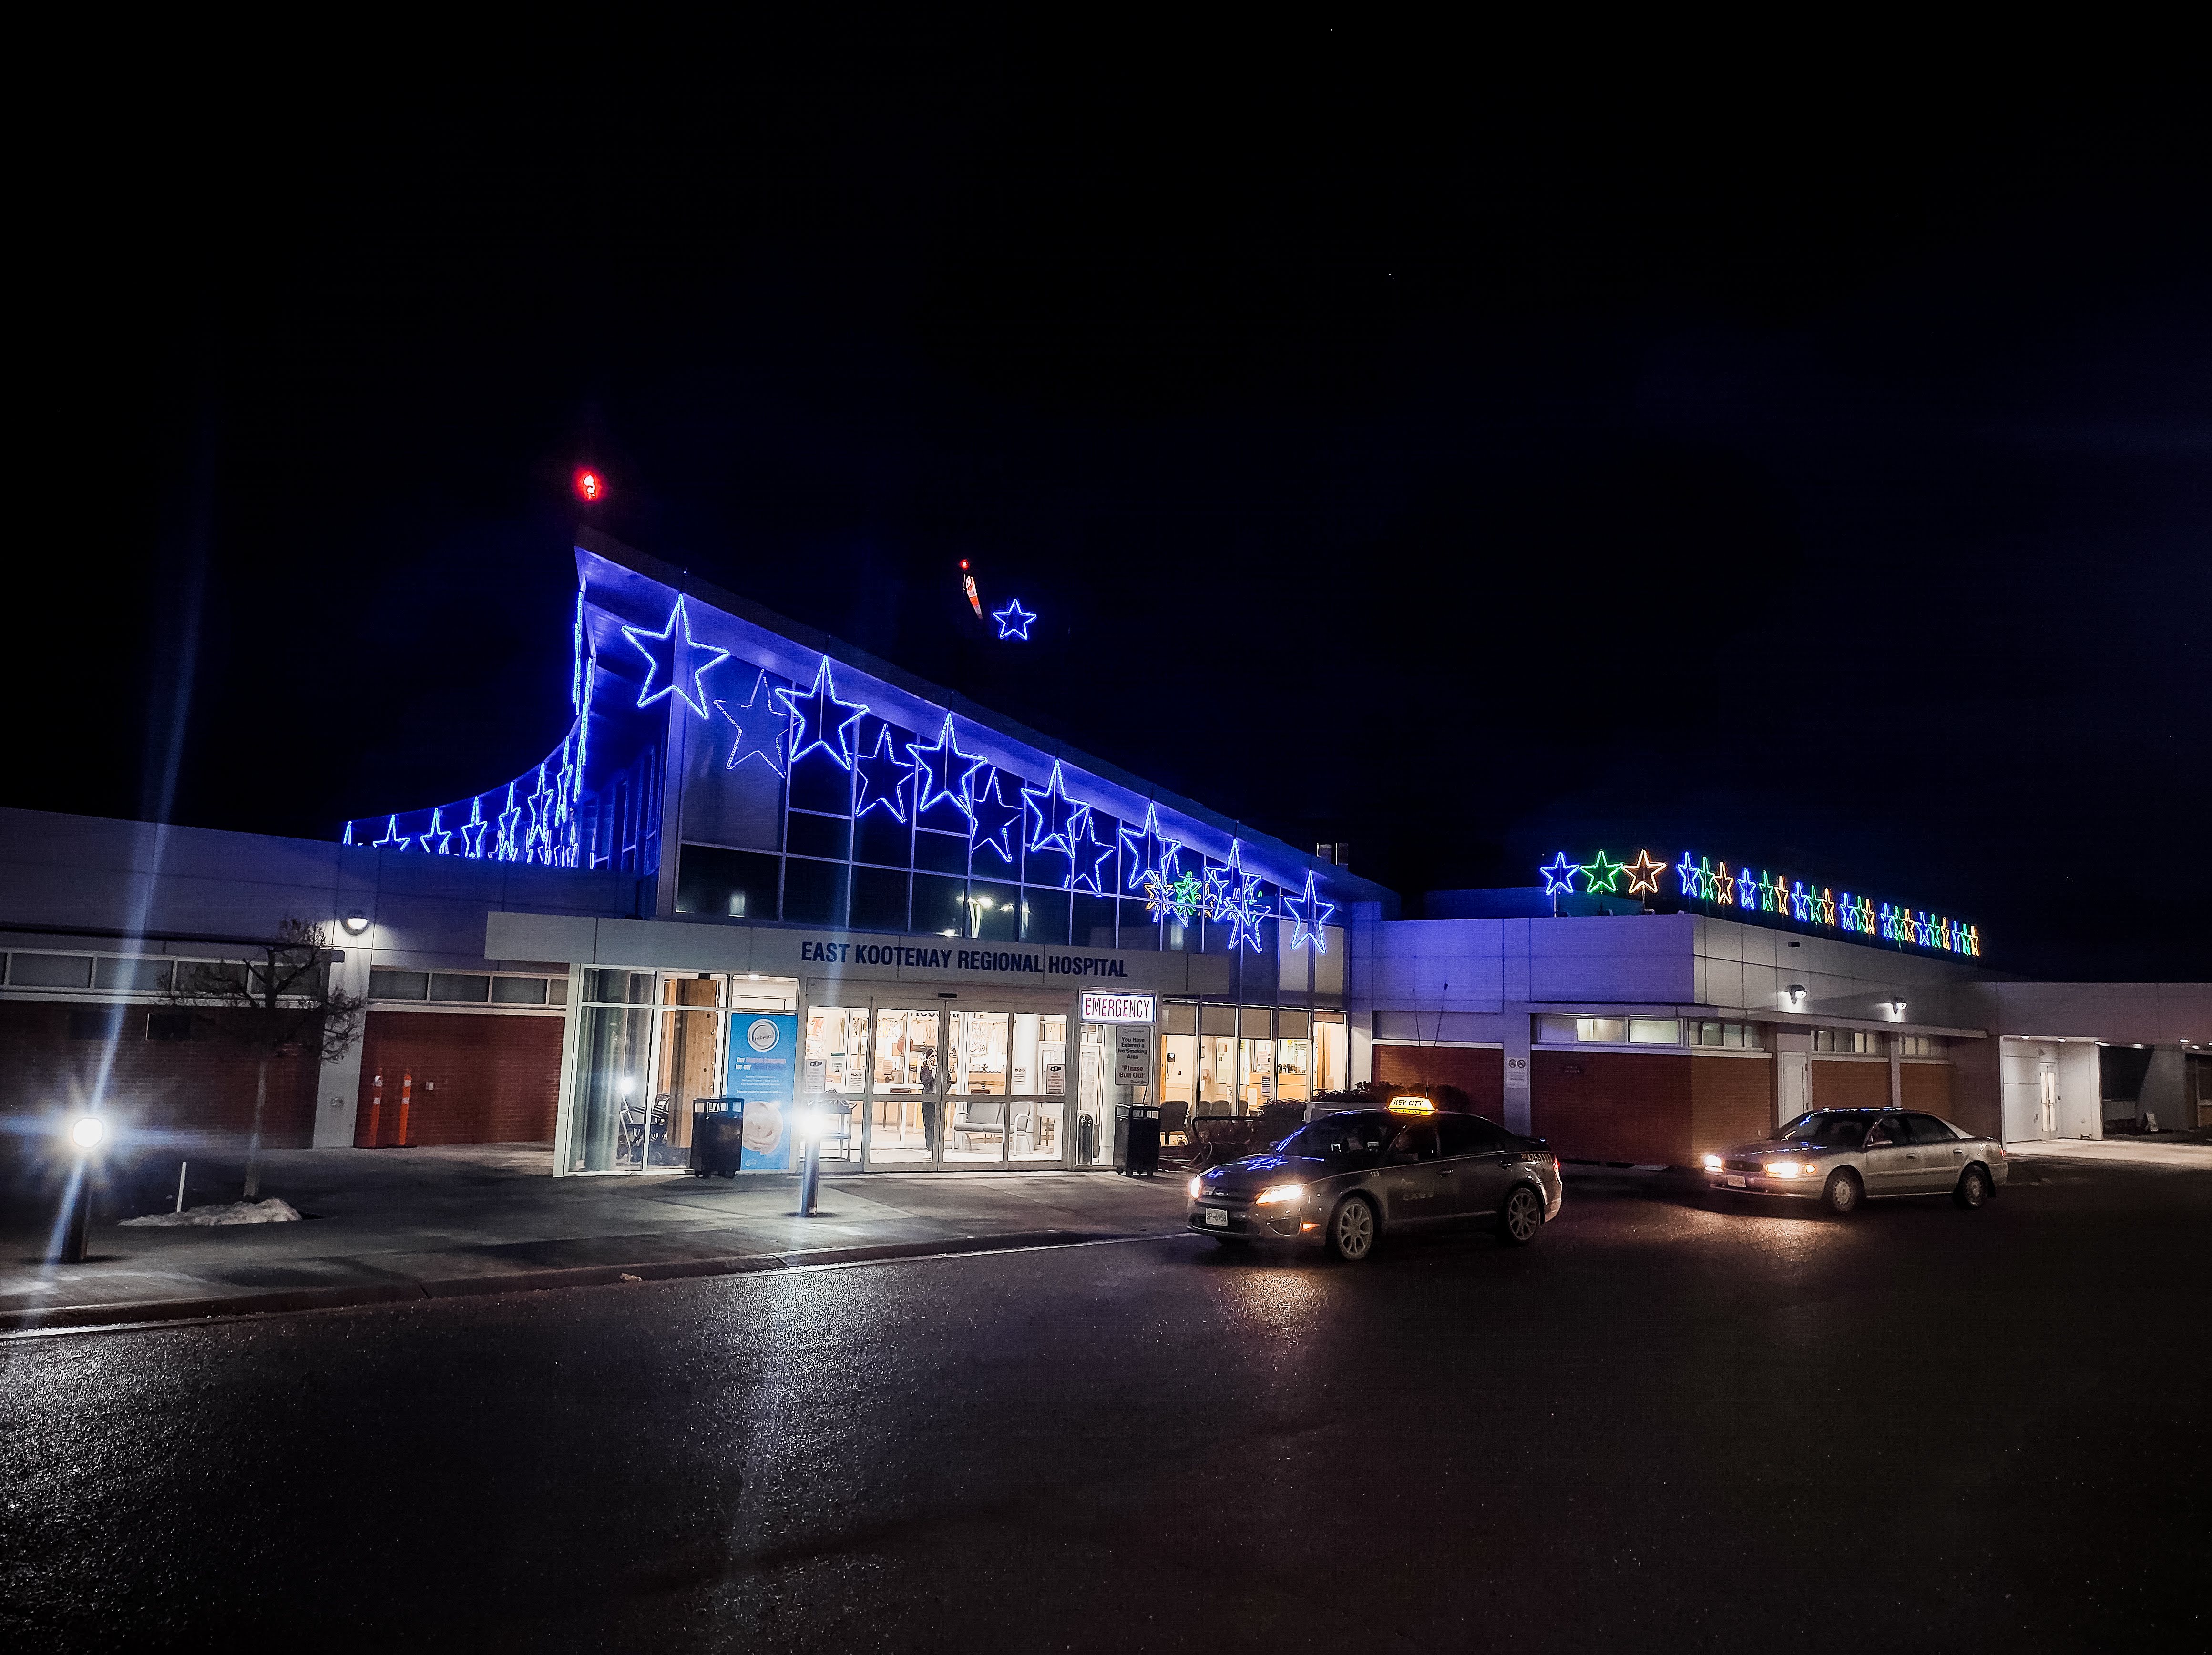 A photo of the East Kootenay Regional Hospital building taken at night lit up with blue and yellow stars along the roofline.